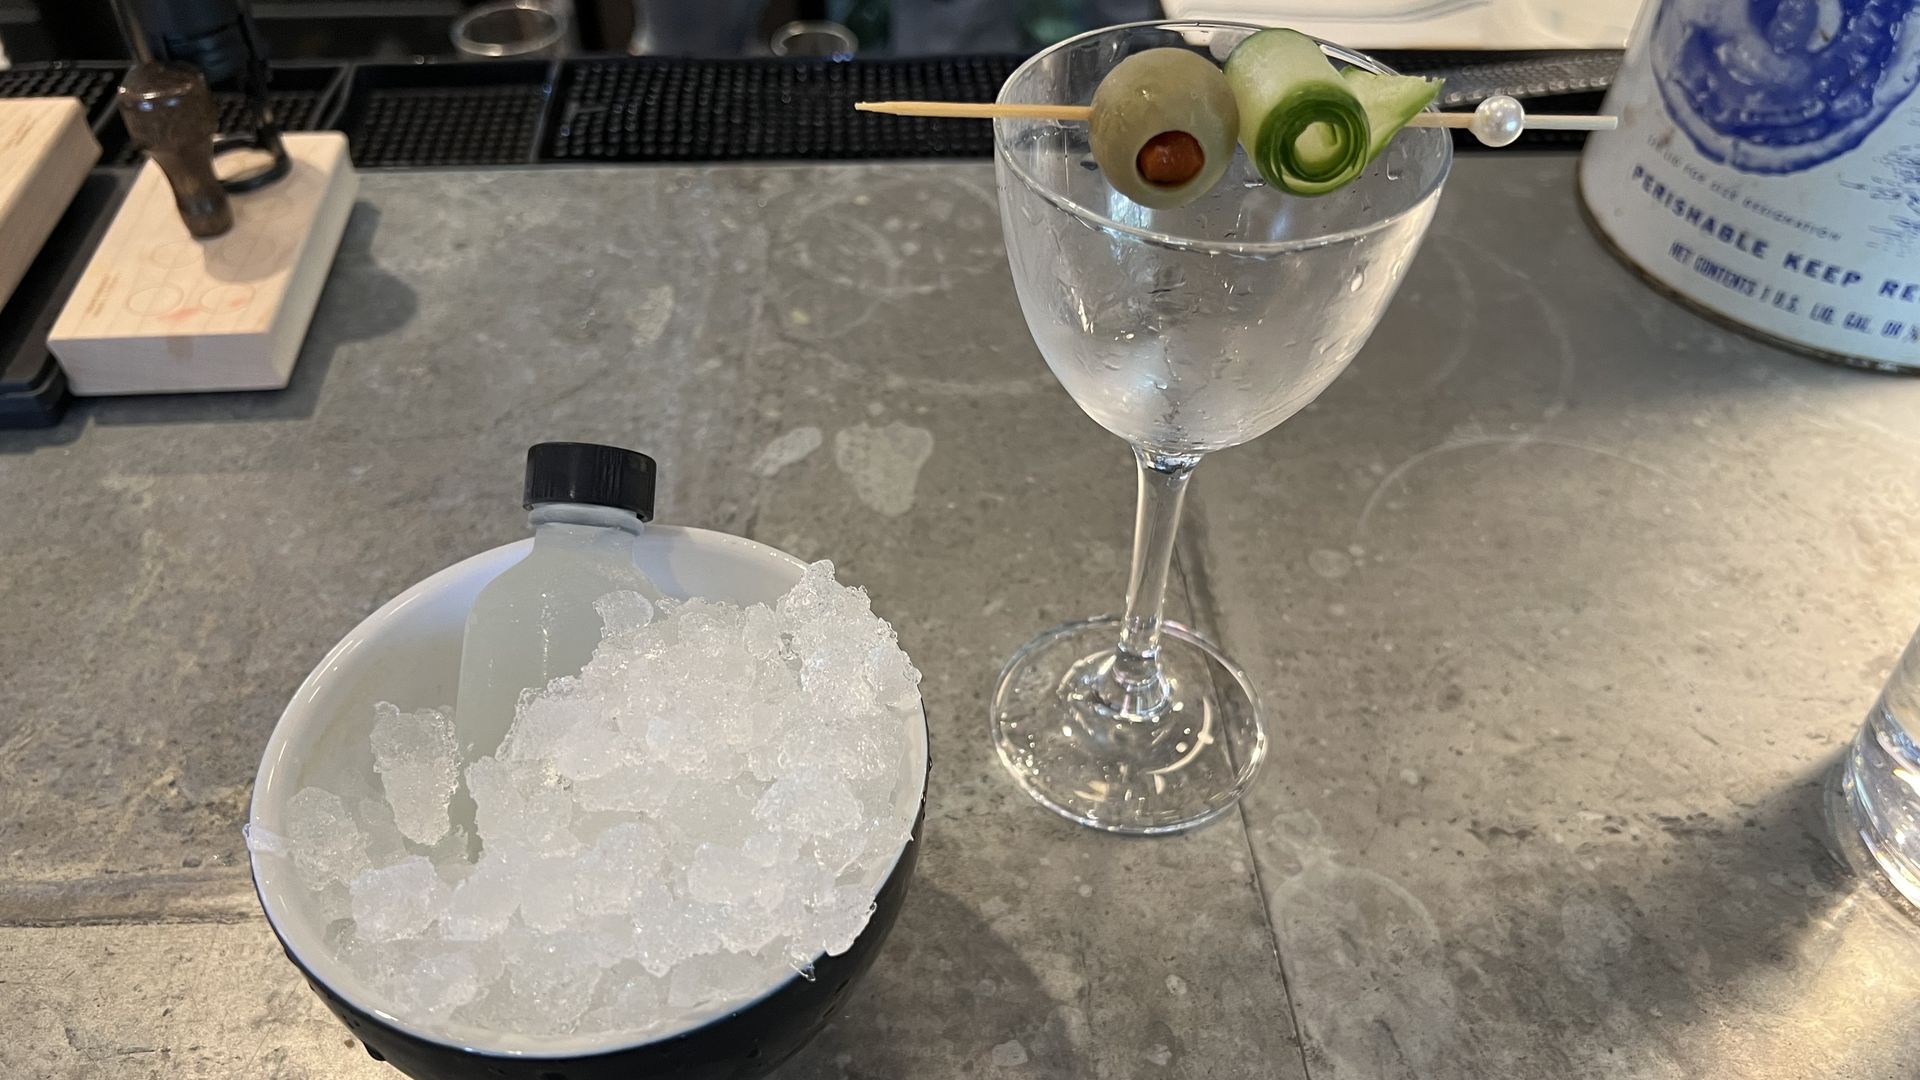 a vial in a bowl of ice and an empty martini glass